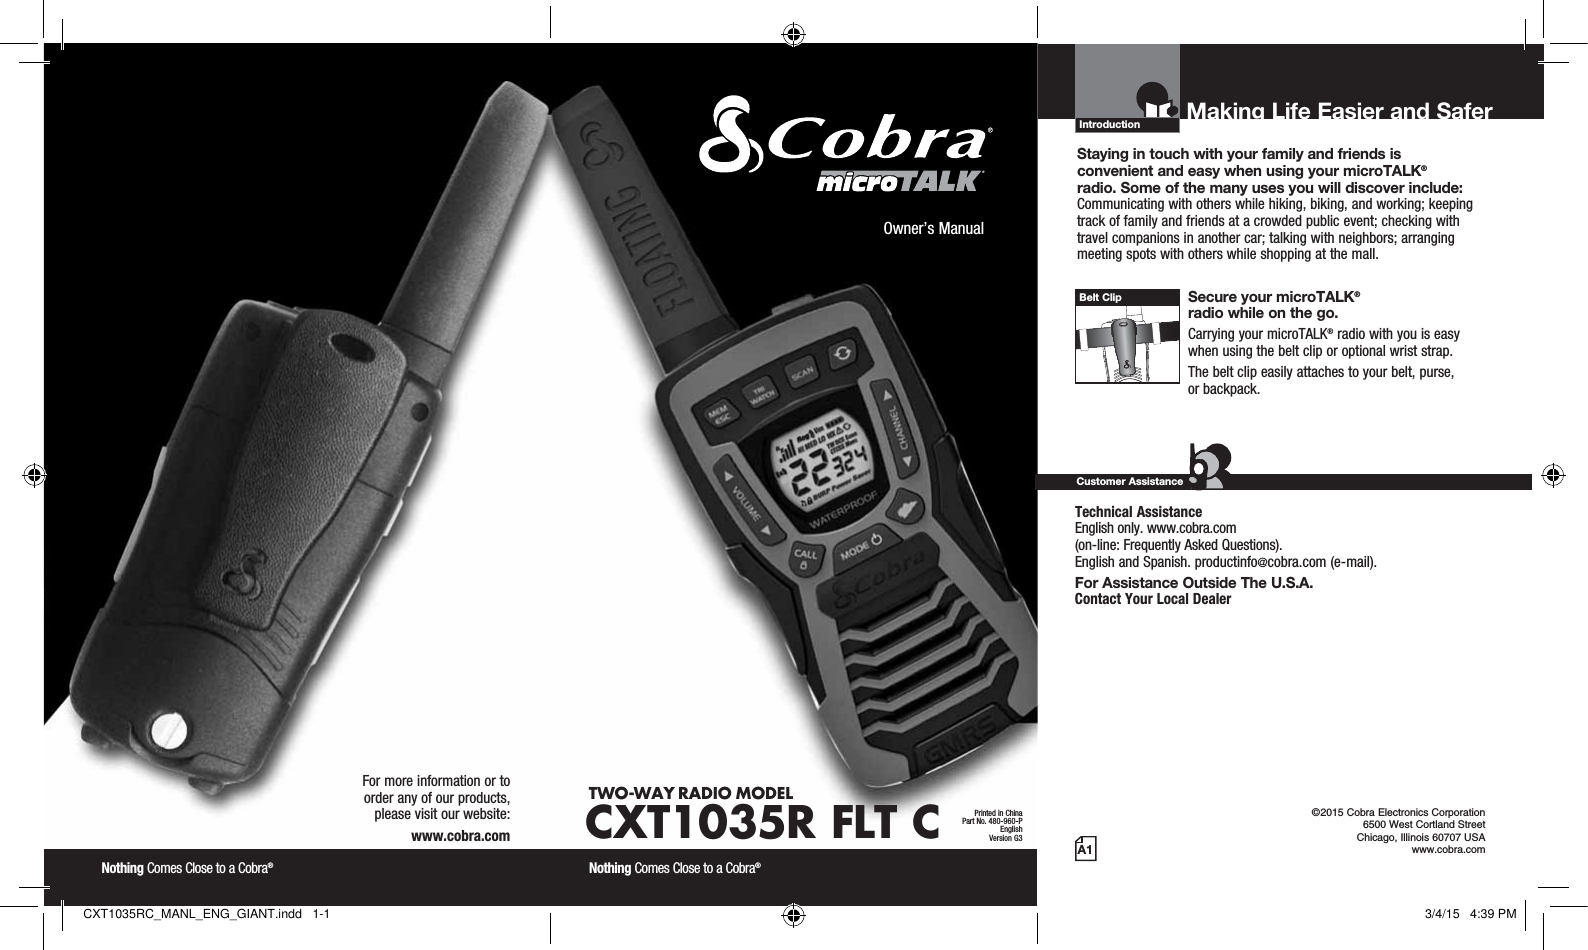 Introduction©2015 Cobra Electronics Corporation 6500 West Cortland Street Chicago, Illinois 60707 USAwww.cobra.comMaking Life Easier and Safer Staying in touch with your family and friends is  convenient and easy when using your microTALK®  radio. Some of the many uses you will discover include:Communicating with others while hiking, biking, and working; keeping track of family and friends at a crowded public event; checking with travel companions in another car; talking with neighbors; arranging meeting spots with others while shopping at the mall. Secure your microTALK®  radio while on the go.Carrying your microTALK® radio with you is easy when using the belt clip or optional wrist strap. The belt clip easily attaches to your belt, purse,  or backpack.Customer AssistanceA1Owner’s ManualNothing Comes Close to a Cobra® Nothing Comes Close to a Cobra® For more information or to  order any of our products,  please visit our website:www.cobra.comBelt ClipPrinted in ChinaPart No. 480-960-PEnglishVersion G3TWO-WAY RADIO  MODEL CXT1035R FLT CTechnical Assistance  English only. www.cobra.com  (on-line: Frequently Asked Questions).  English and Spanish. productinfo@cobra.com (e-mail).For Assistance Outside The U.S.A. Contact Your Local DealerCXT1035RC_MANL_ENG_GIANT.indd   1-1 3/4/15   4:39 PM